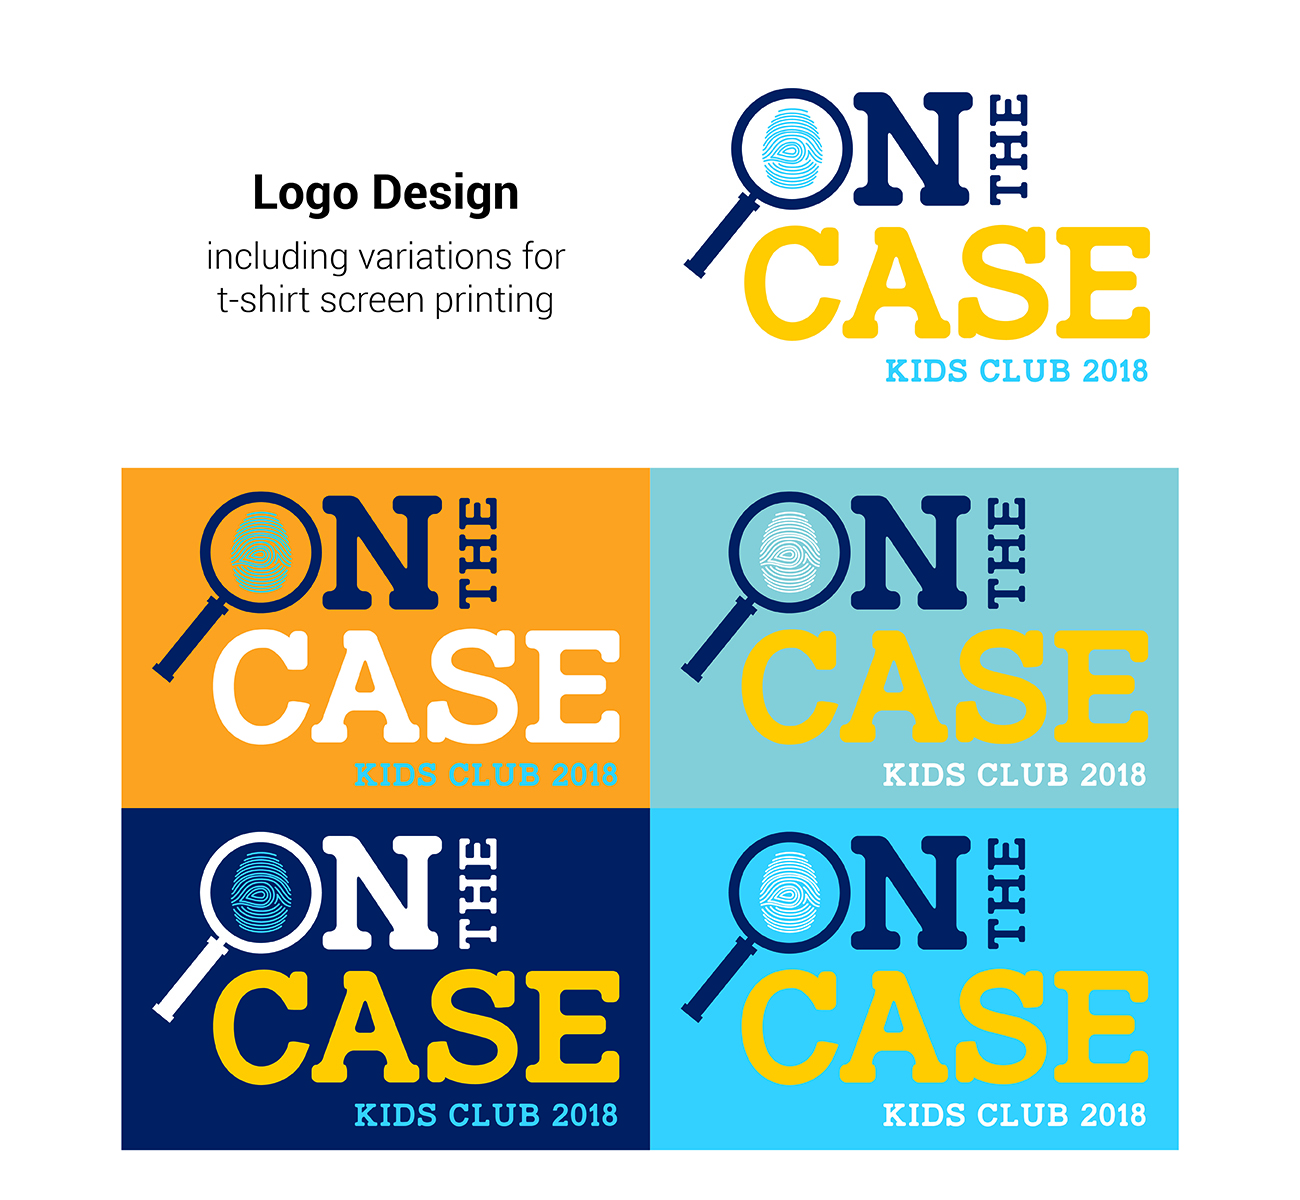 On The Case logo variations